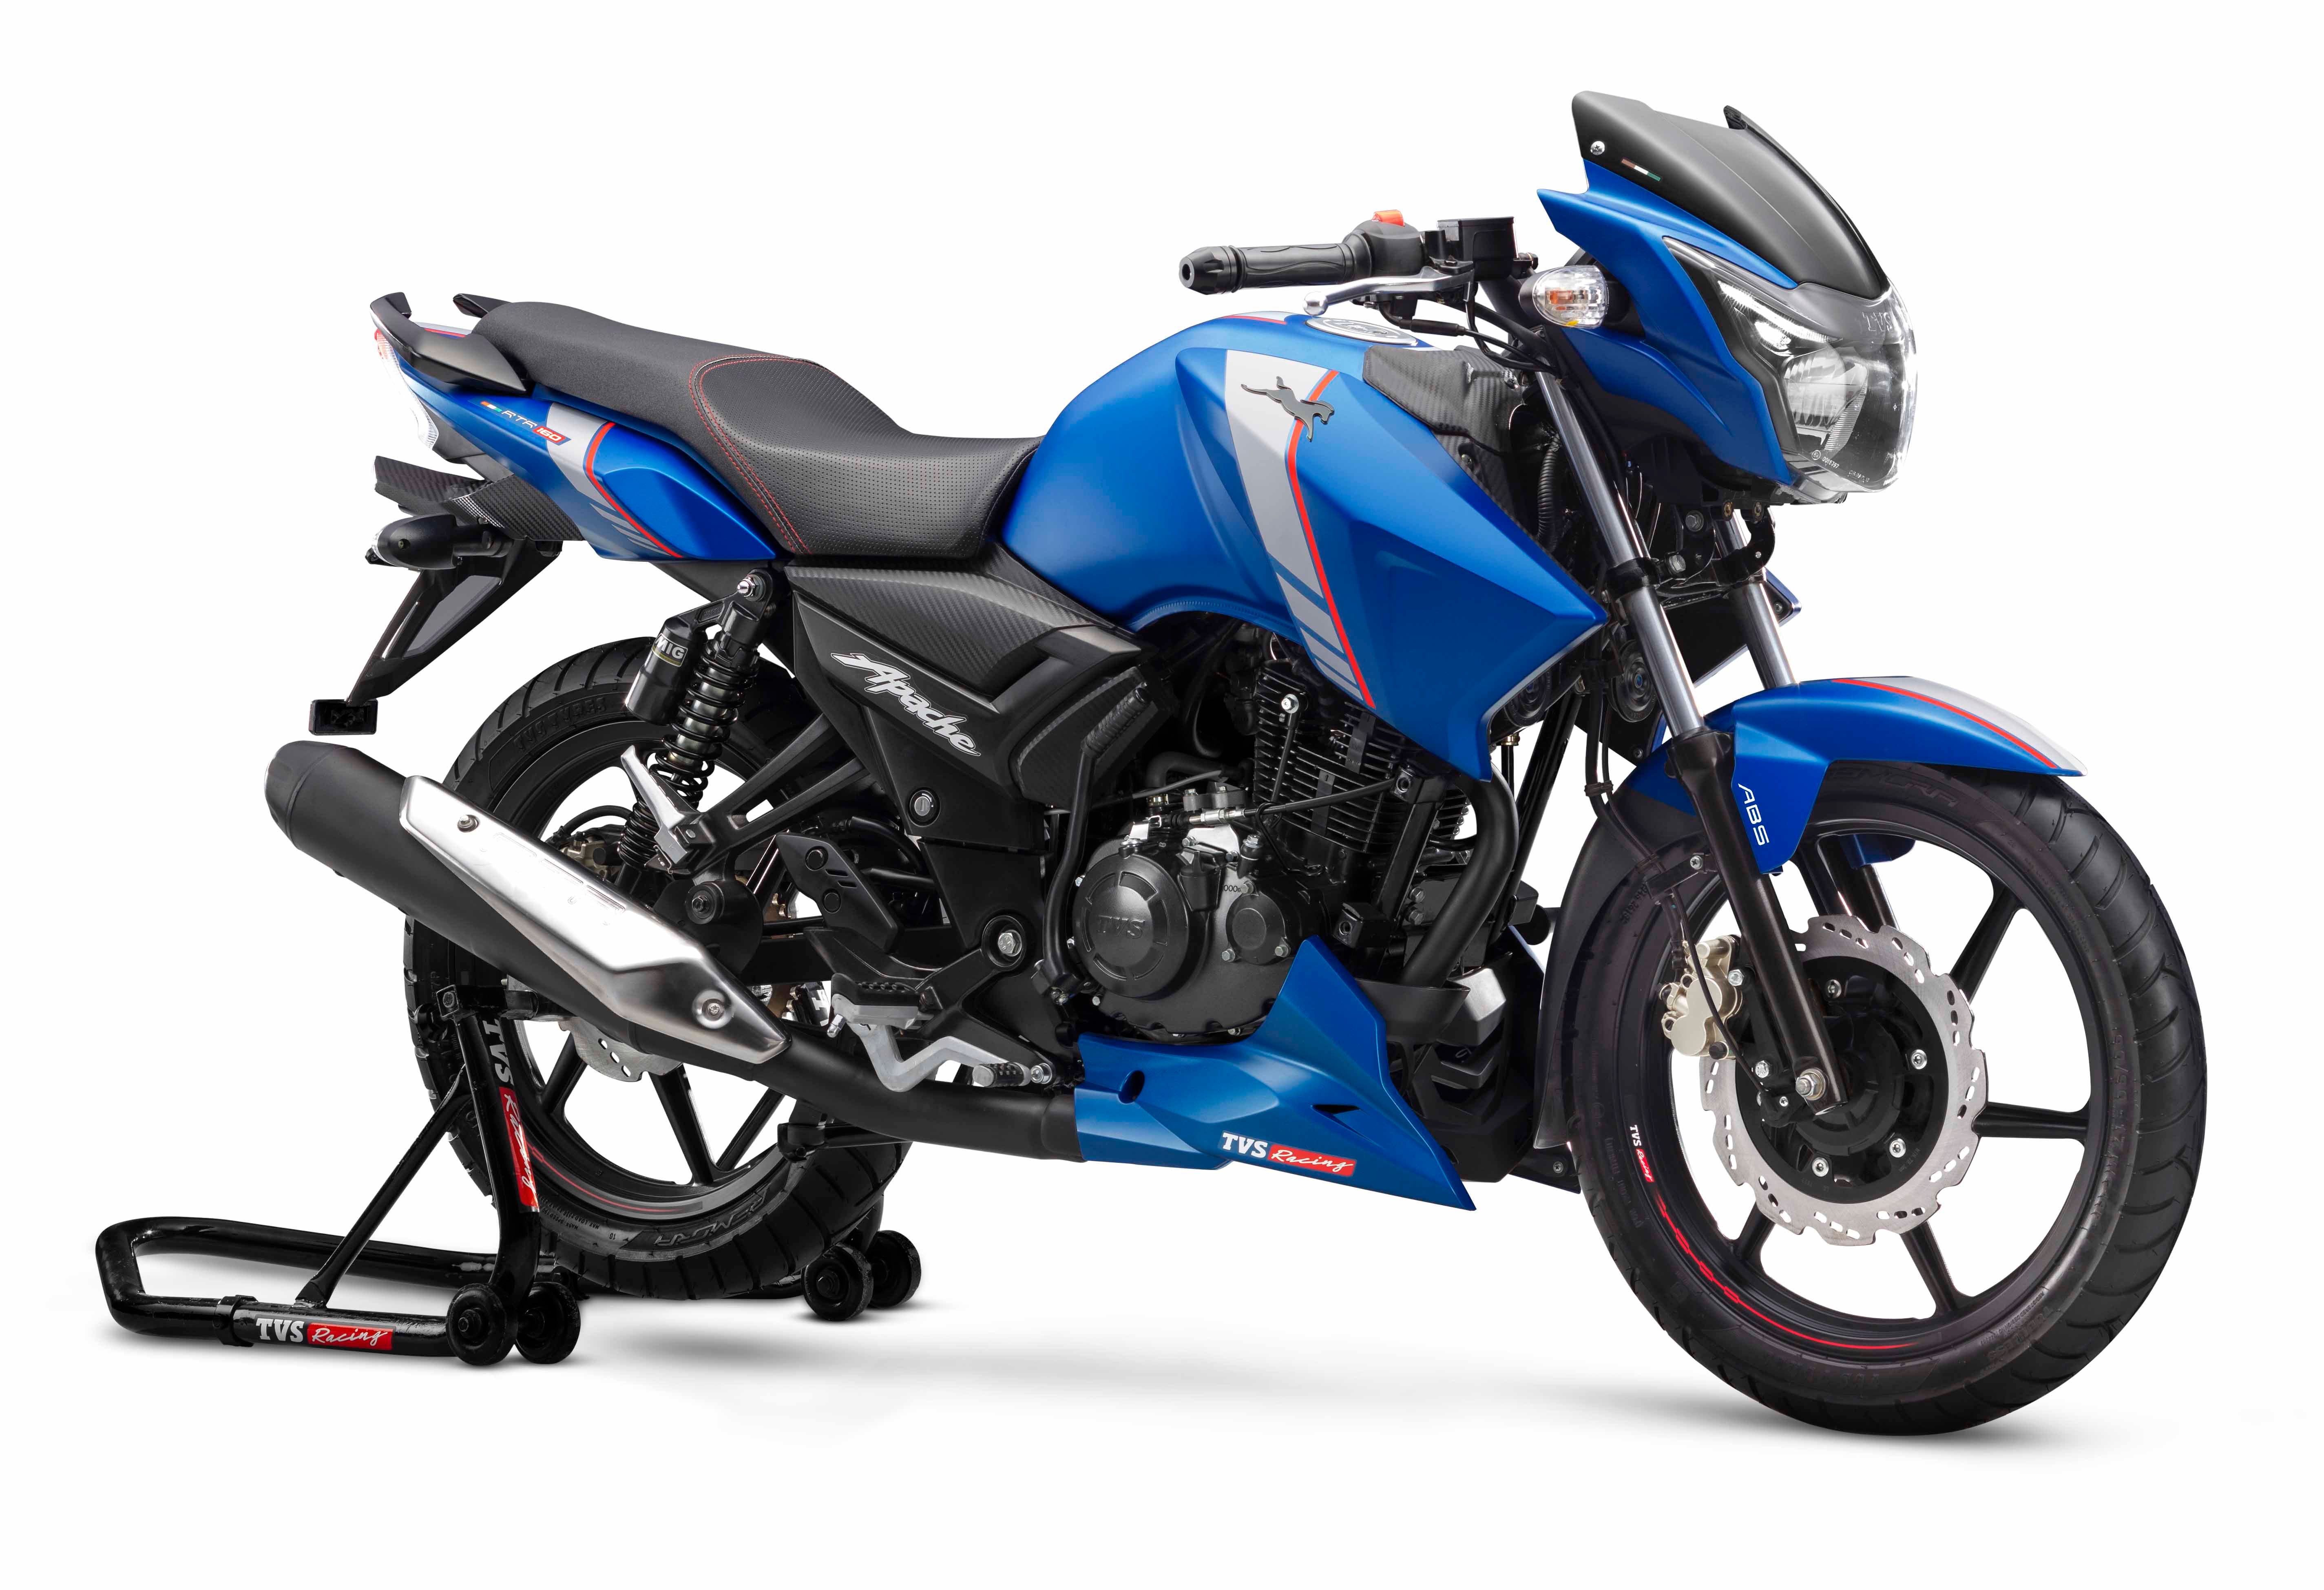 2019 Tvs Apache Rtr 160 Gets Abs And New Updates Bikedekho